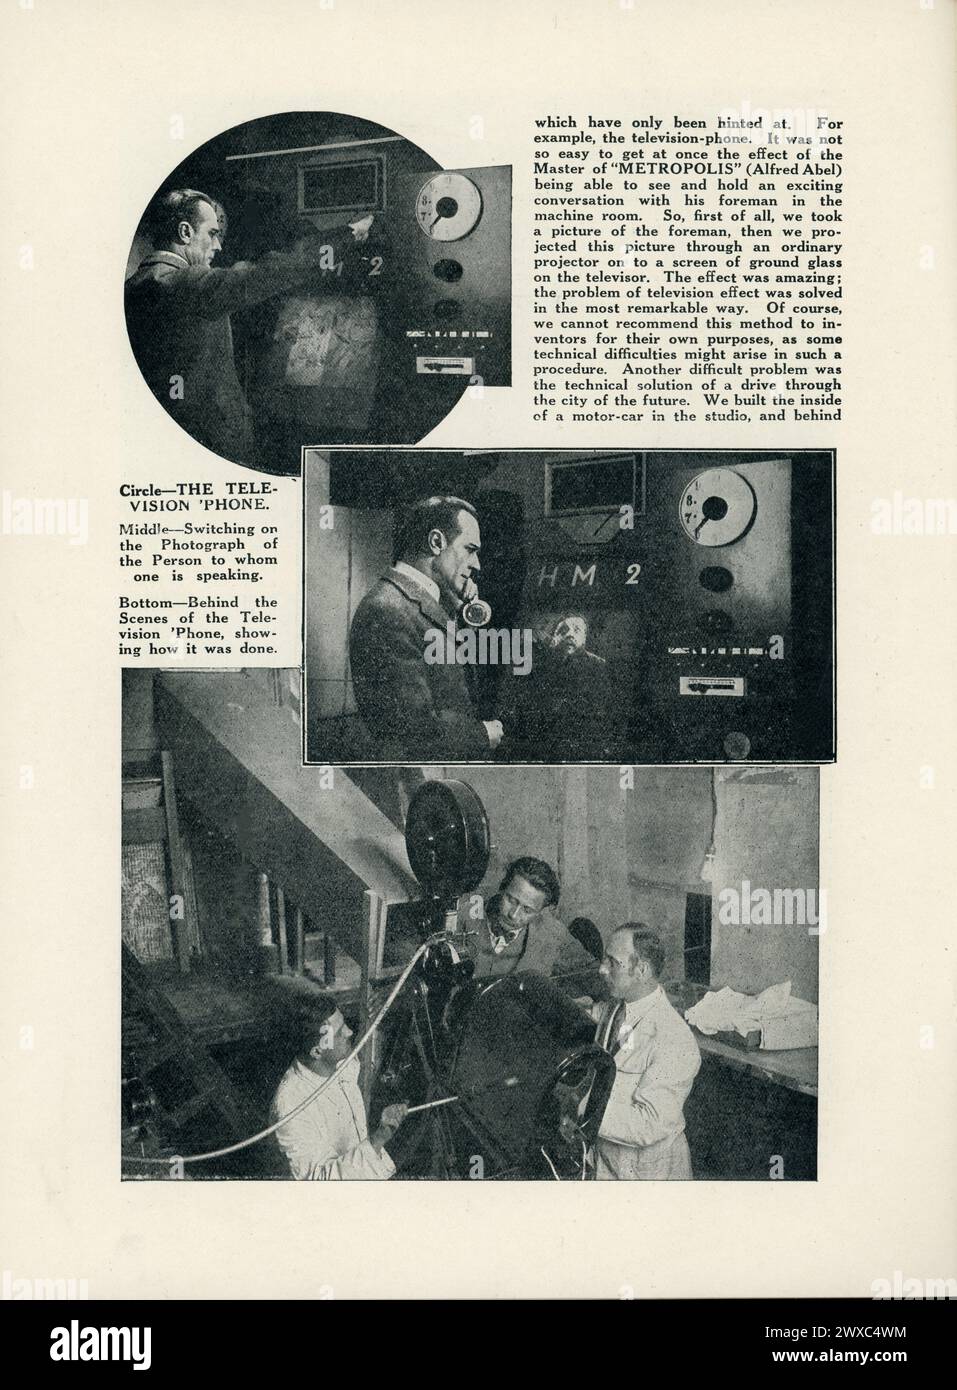 How the TELEVISION PHONE special effect as used by ALFRED ABEL as Ferederson was achieved on page from original release British programme for METROPOLIS 1927 director FRITZ LANG novel and screenplay Thea von Harbou Universum Film (UFA) Stock Photo